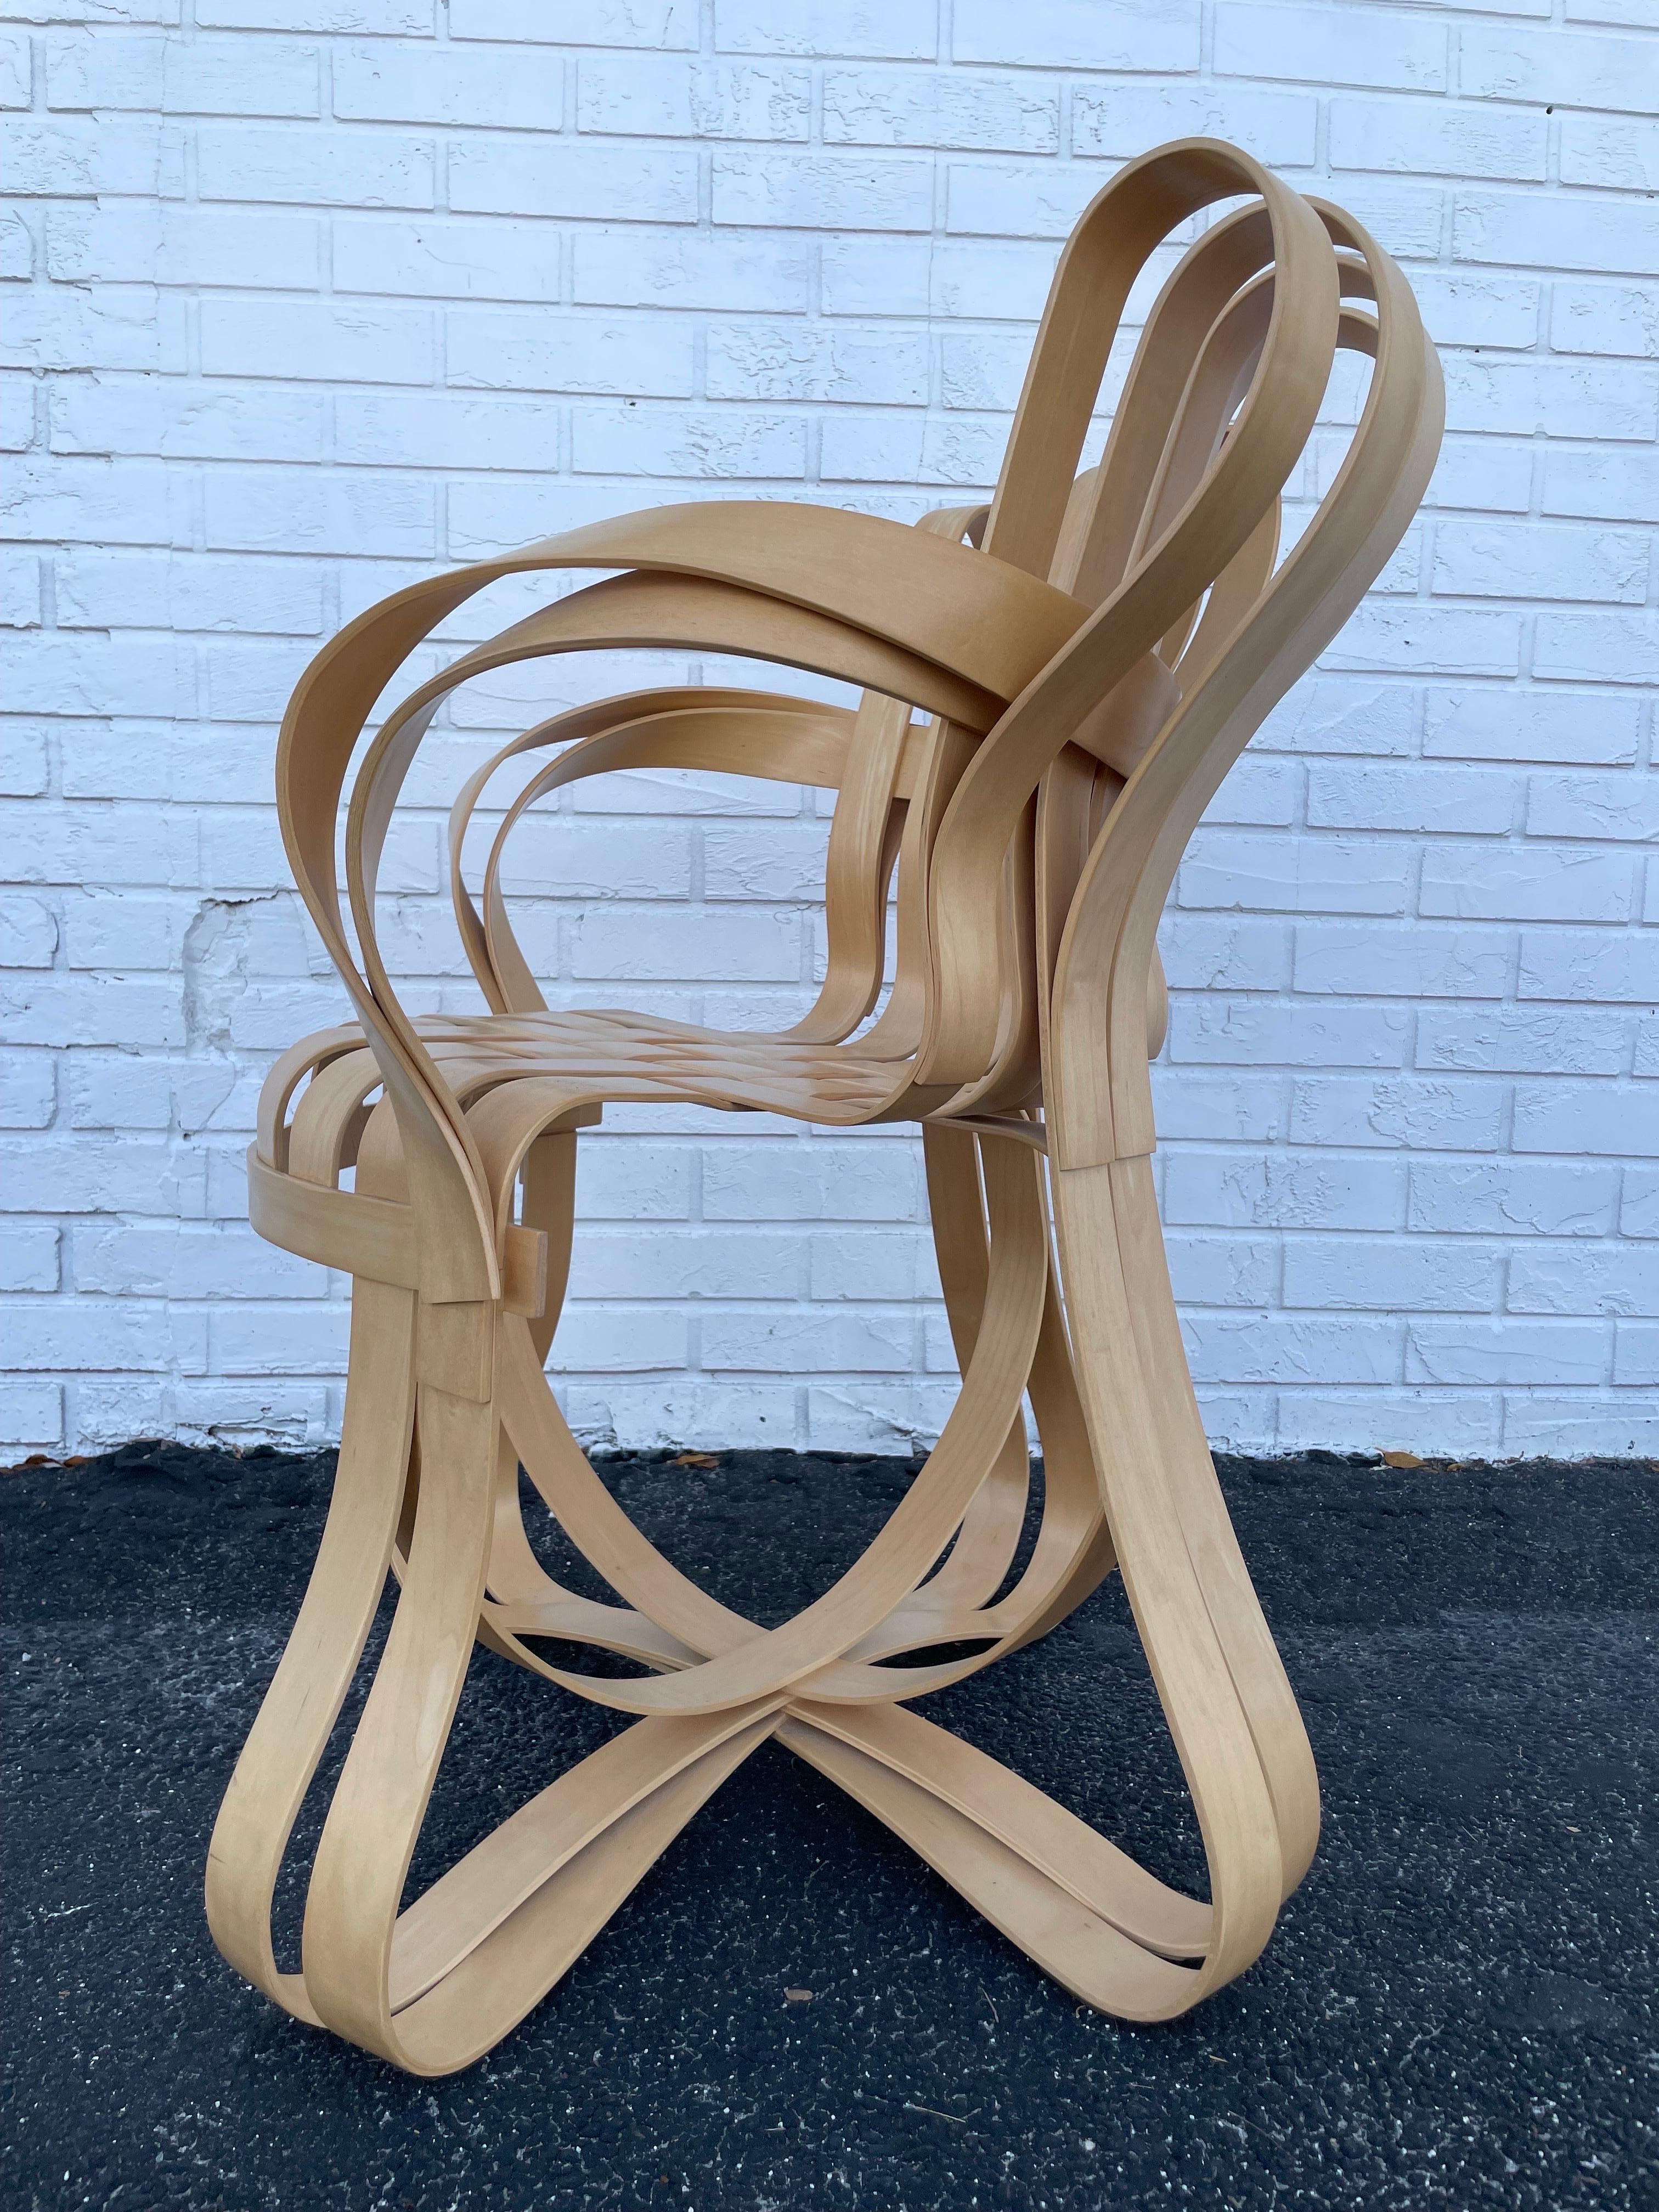 Late 20th Century Frank Gehry Cross Check Chair for Knoll